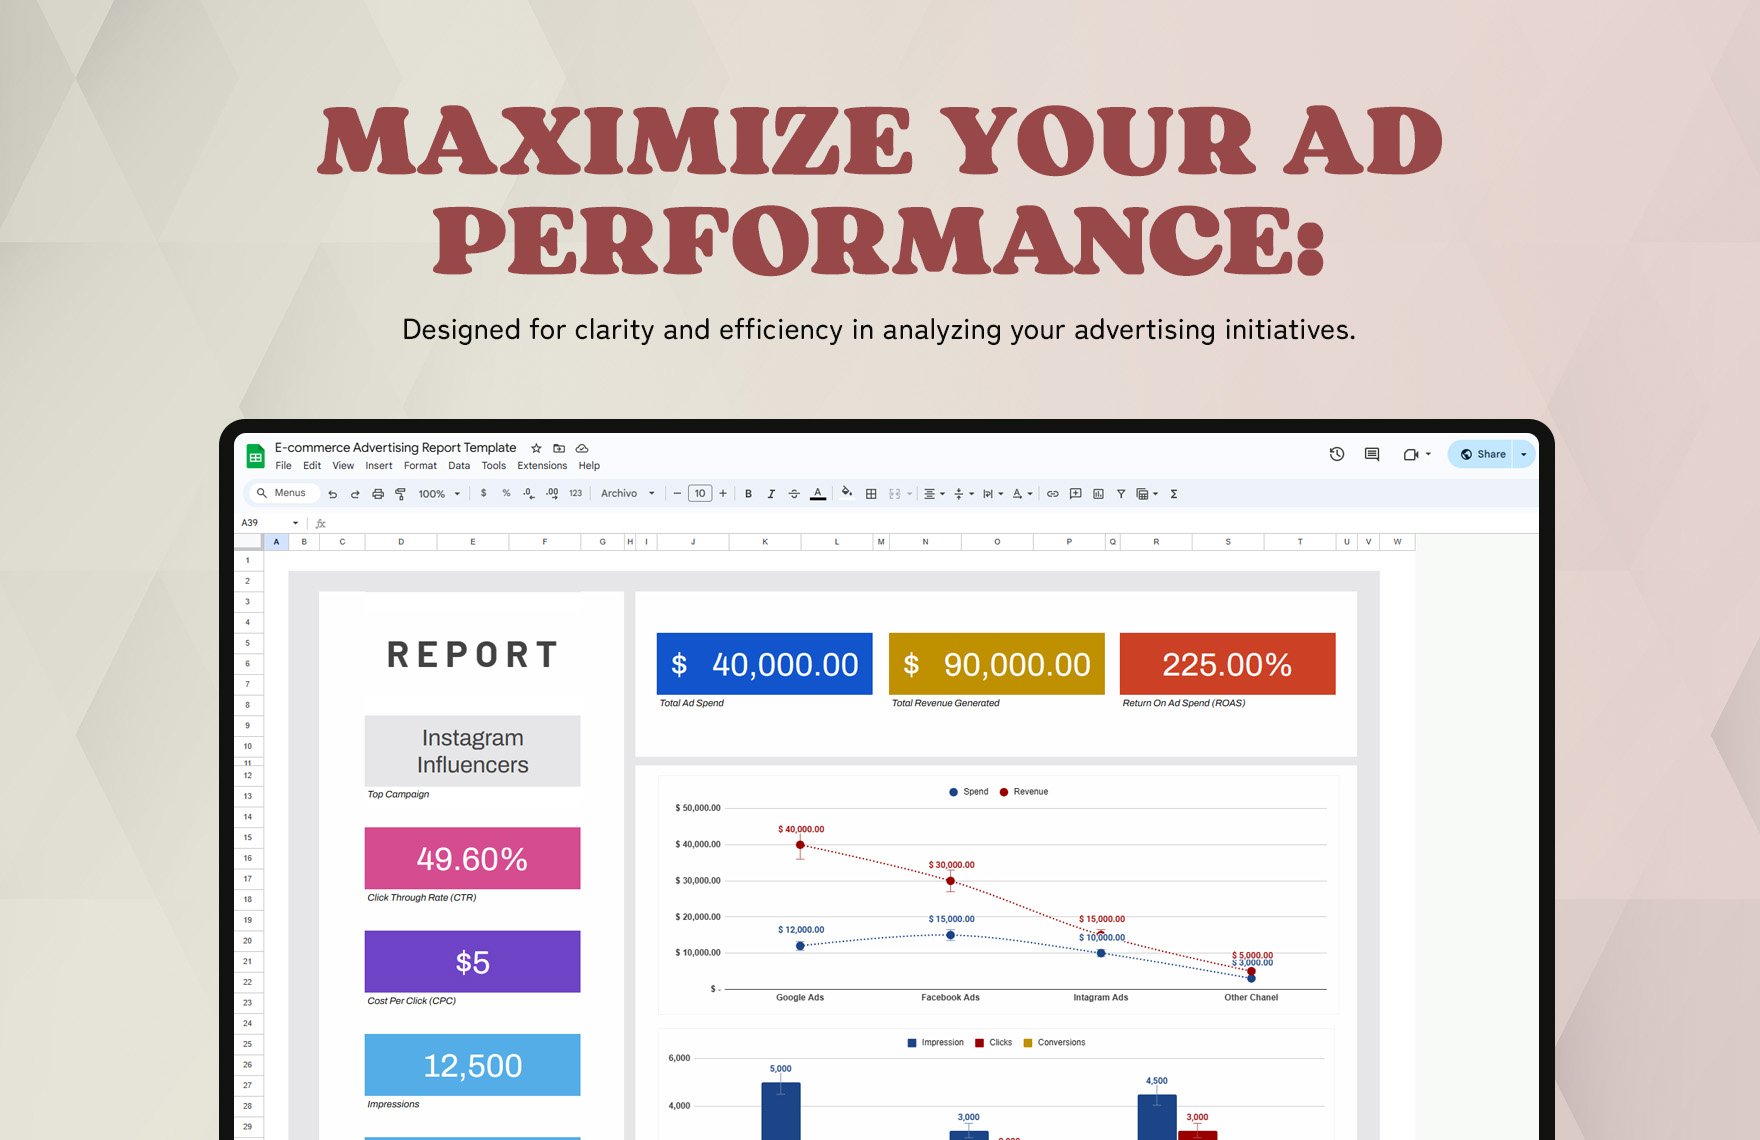 E-commerce Advertising Report Template